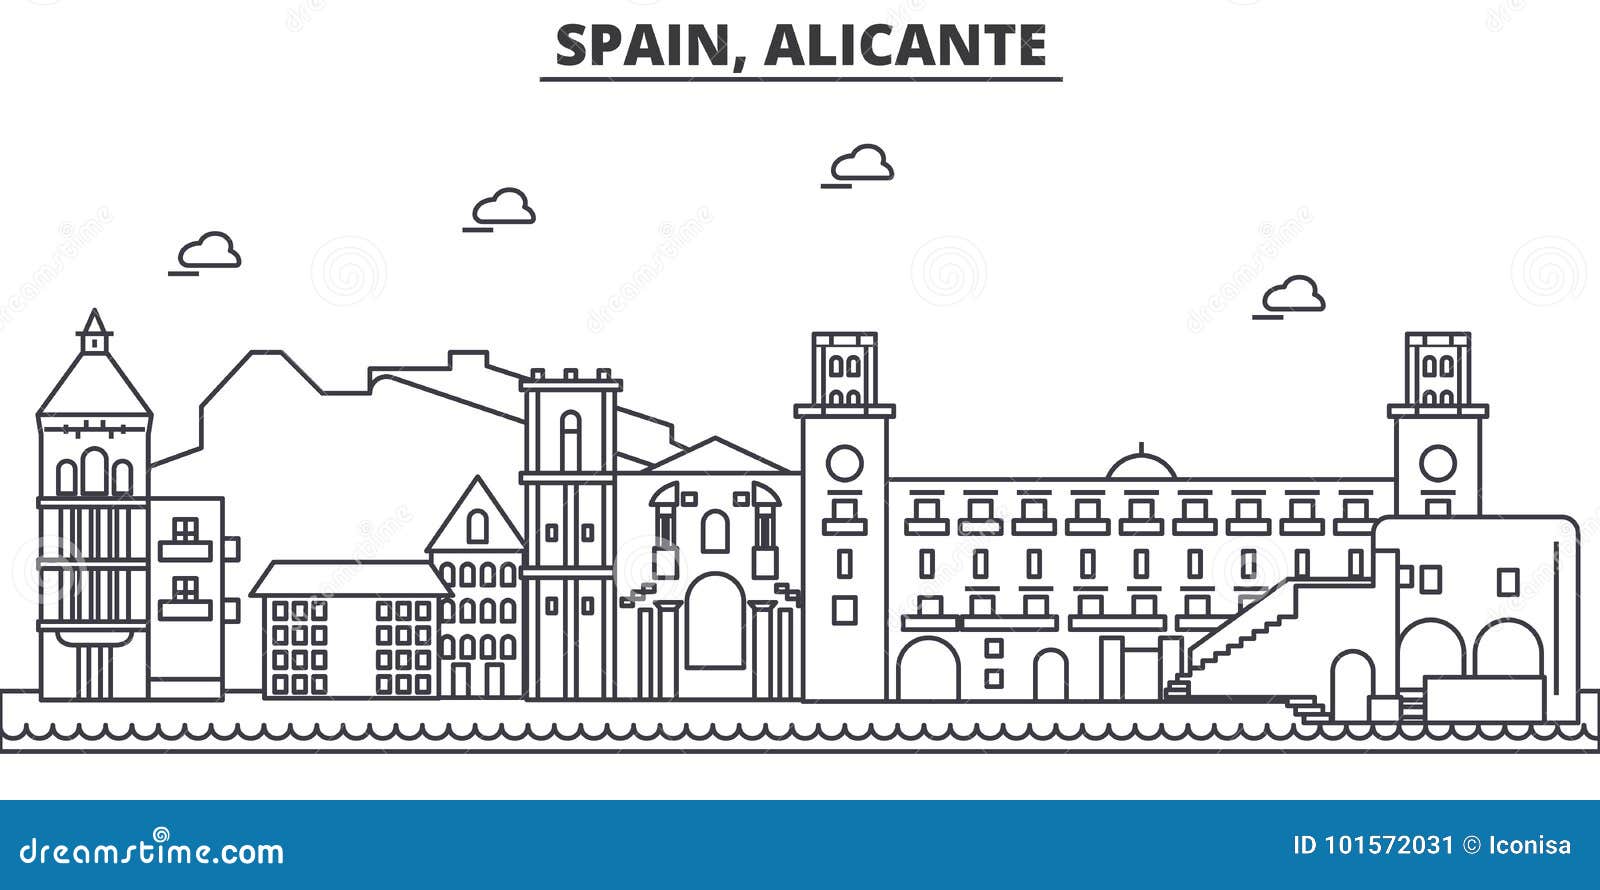 spain, alicante architecture line skyline . linear  cityscape with famous landmarks, city sights